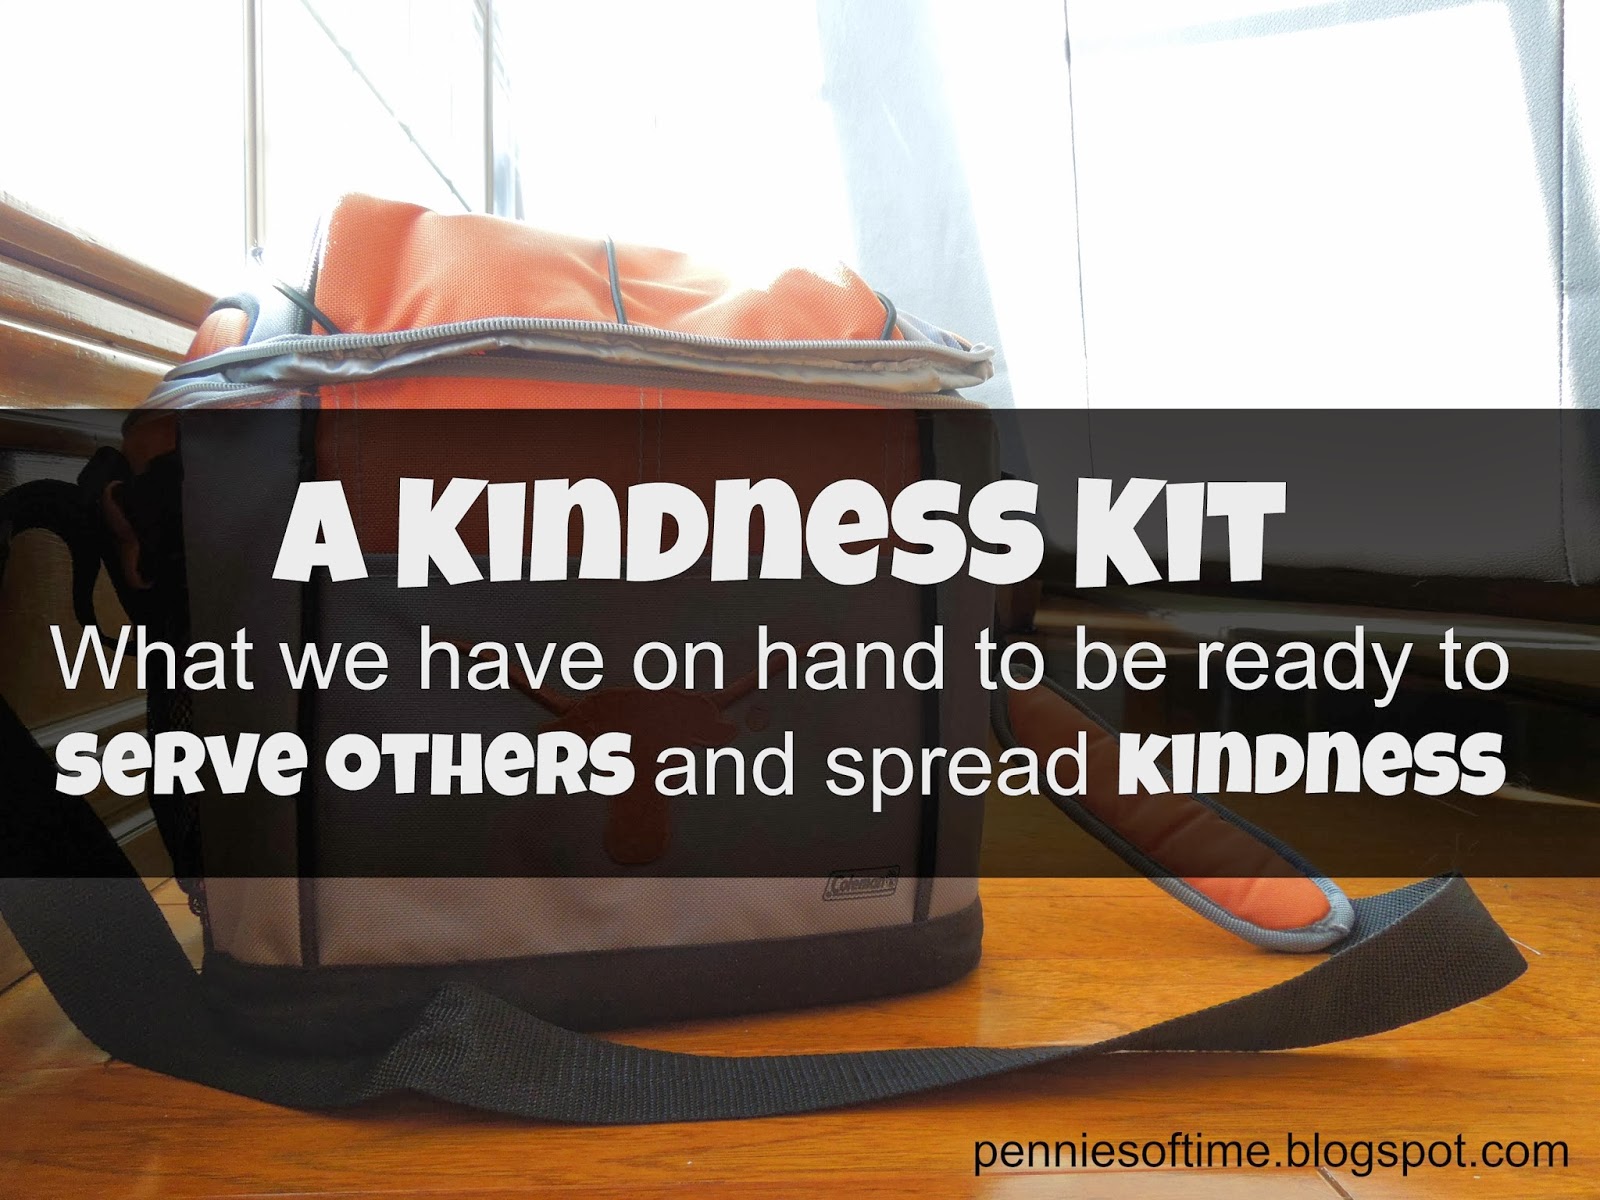 http://penniesoftime.blogspot.com/2013/11/a-kindness-kit-just-what-you-need-for.html